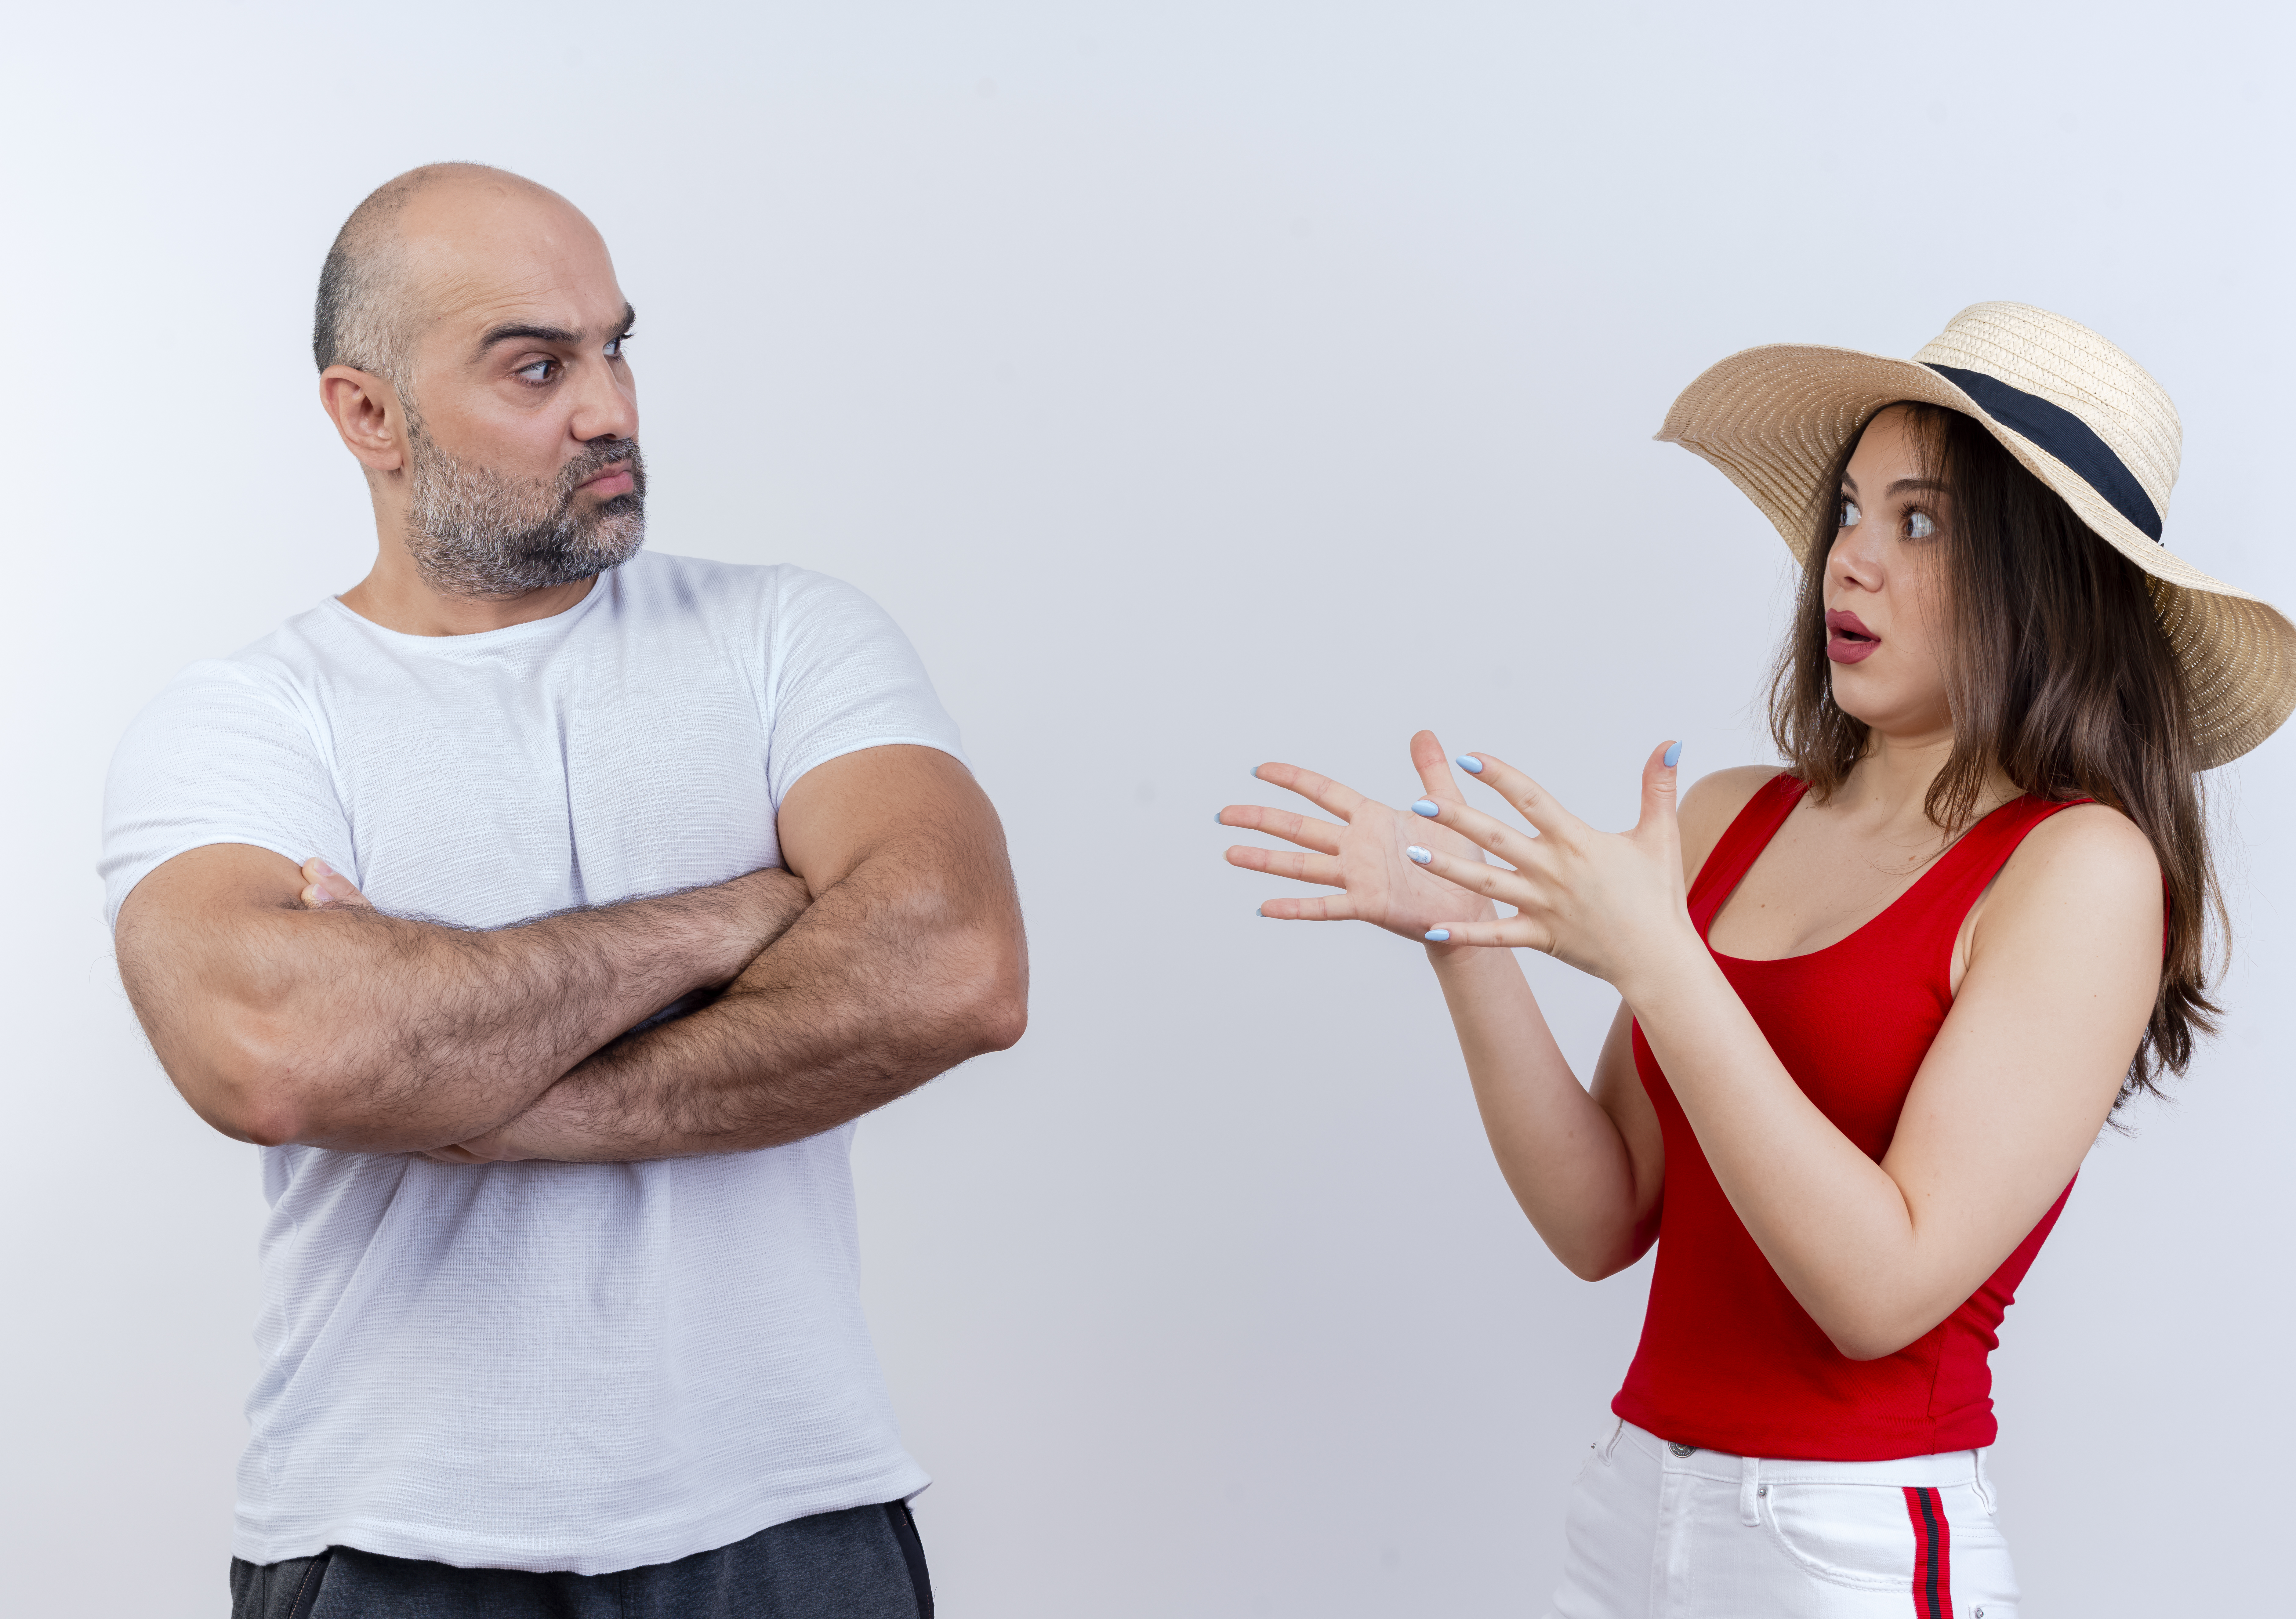 Man showing disapproval to woman wearing a red top and hat | Source: stockking on Freepik